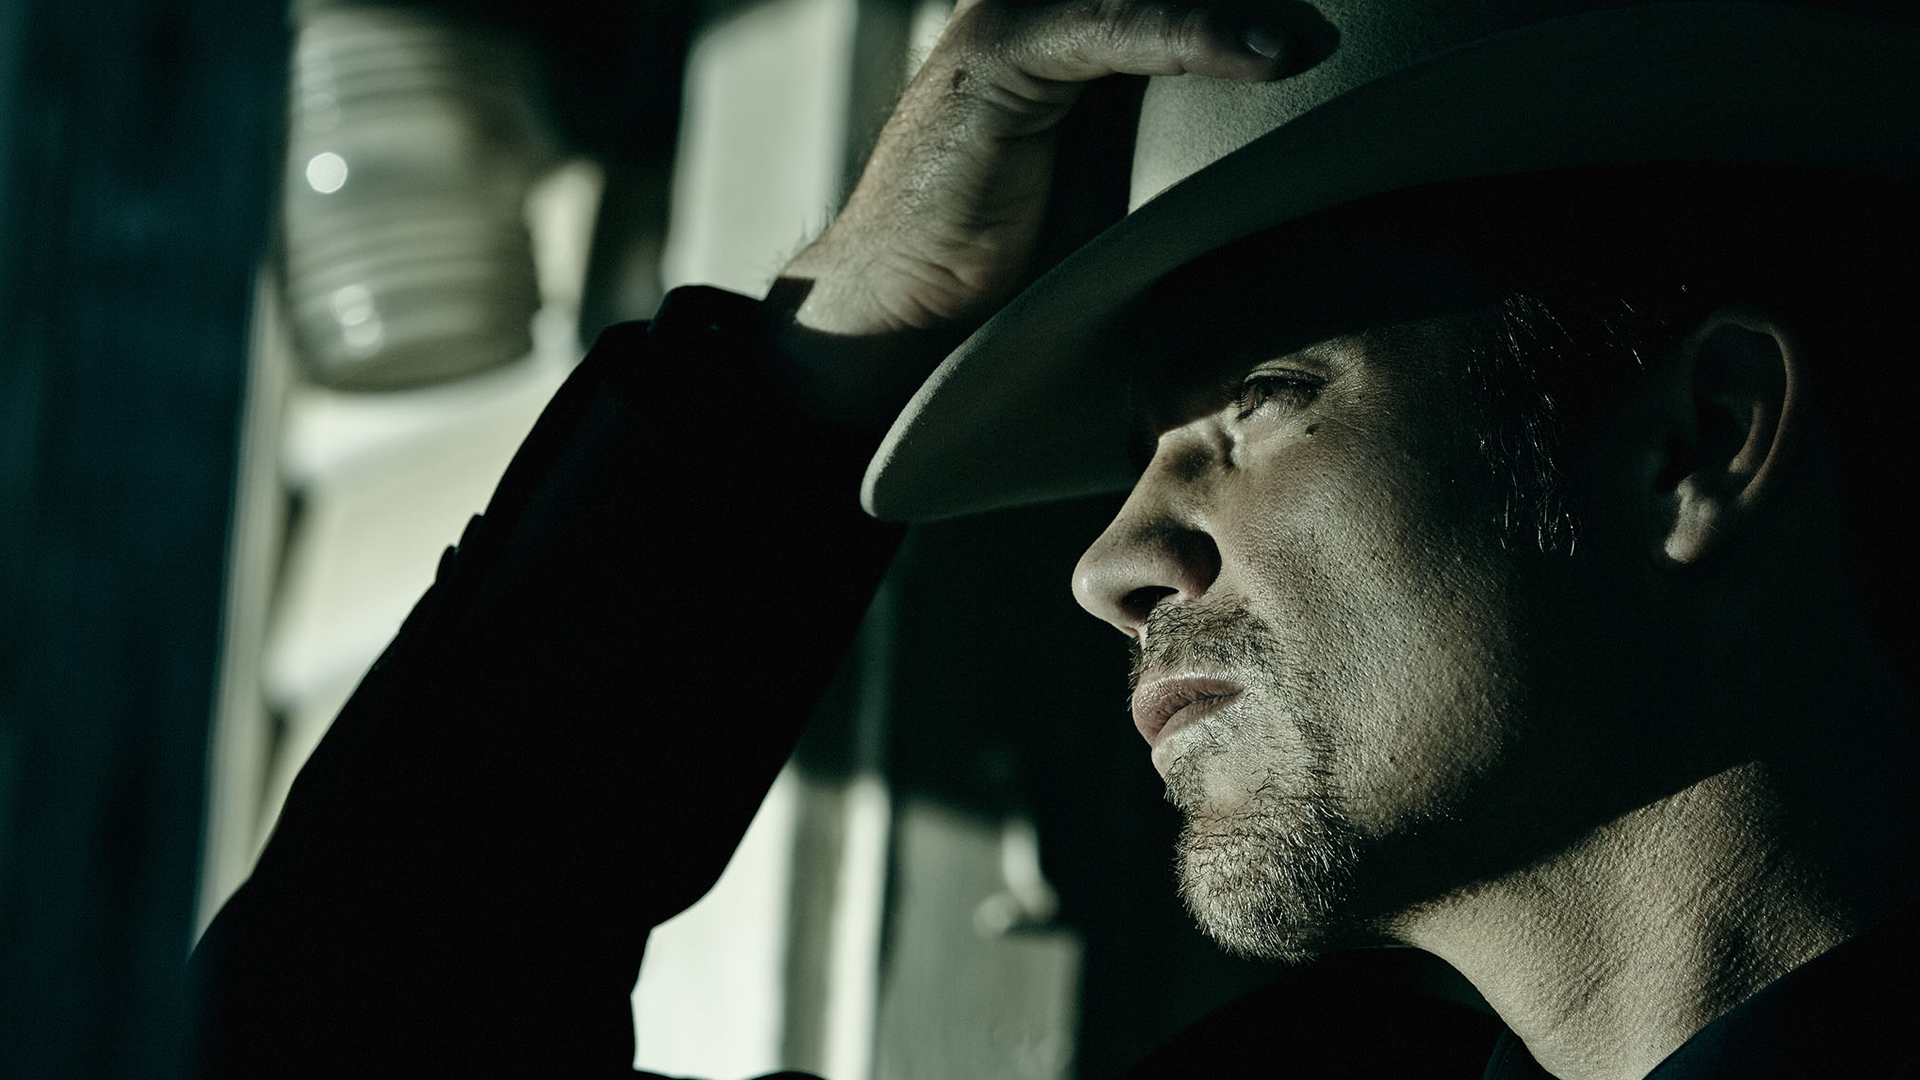 tv show, justified, timothy olyphant